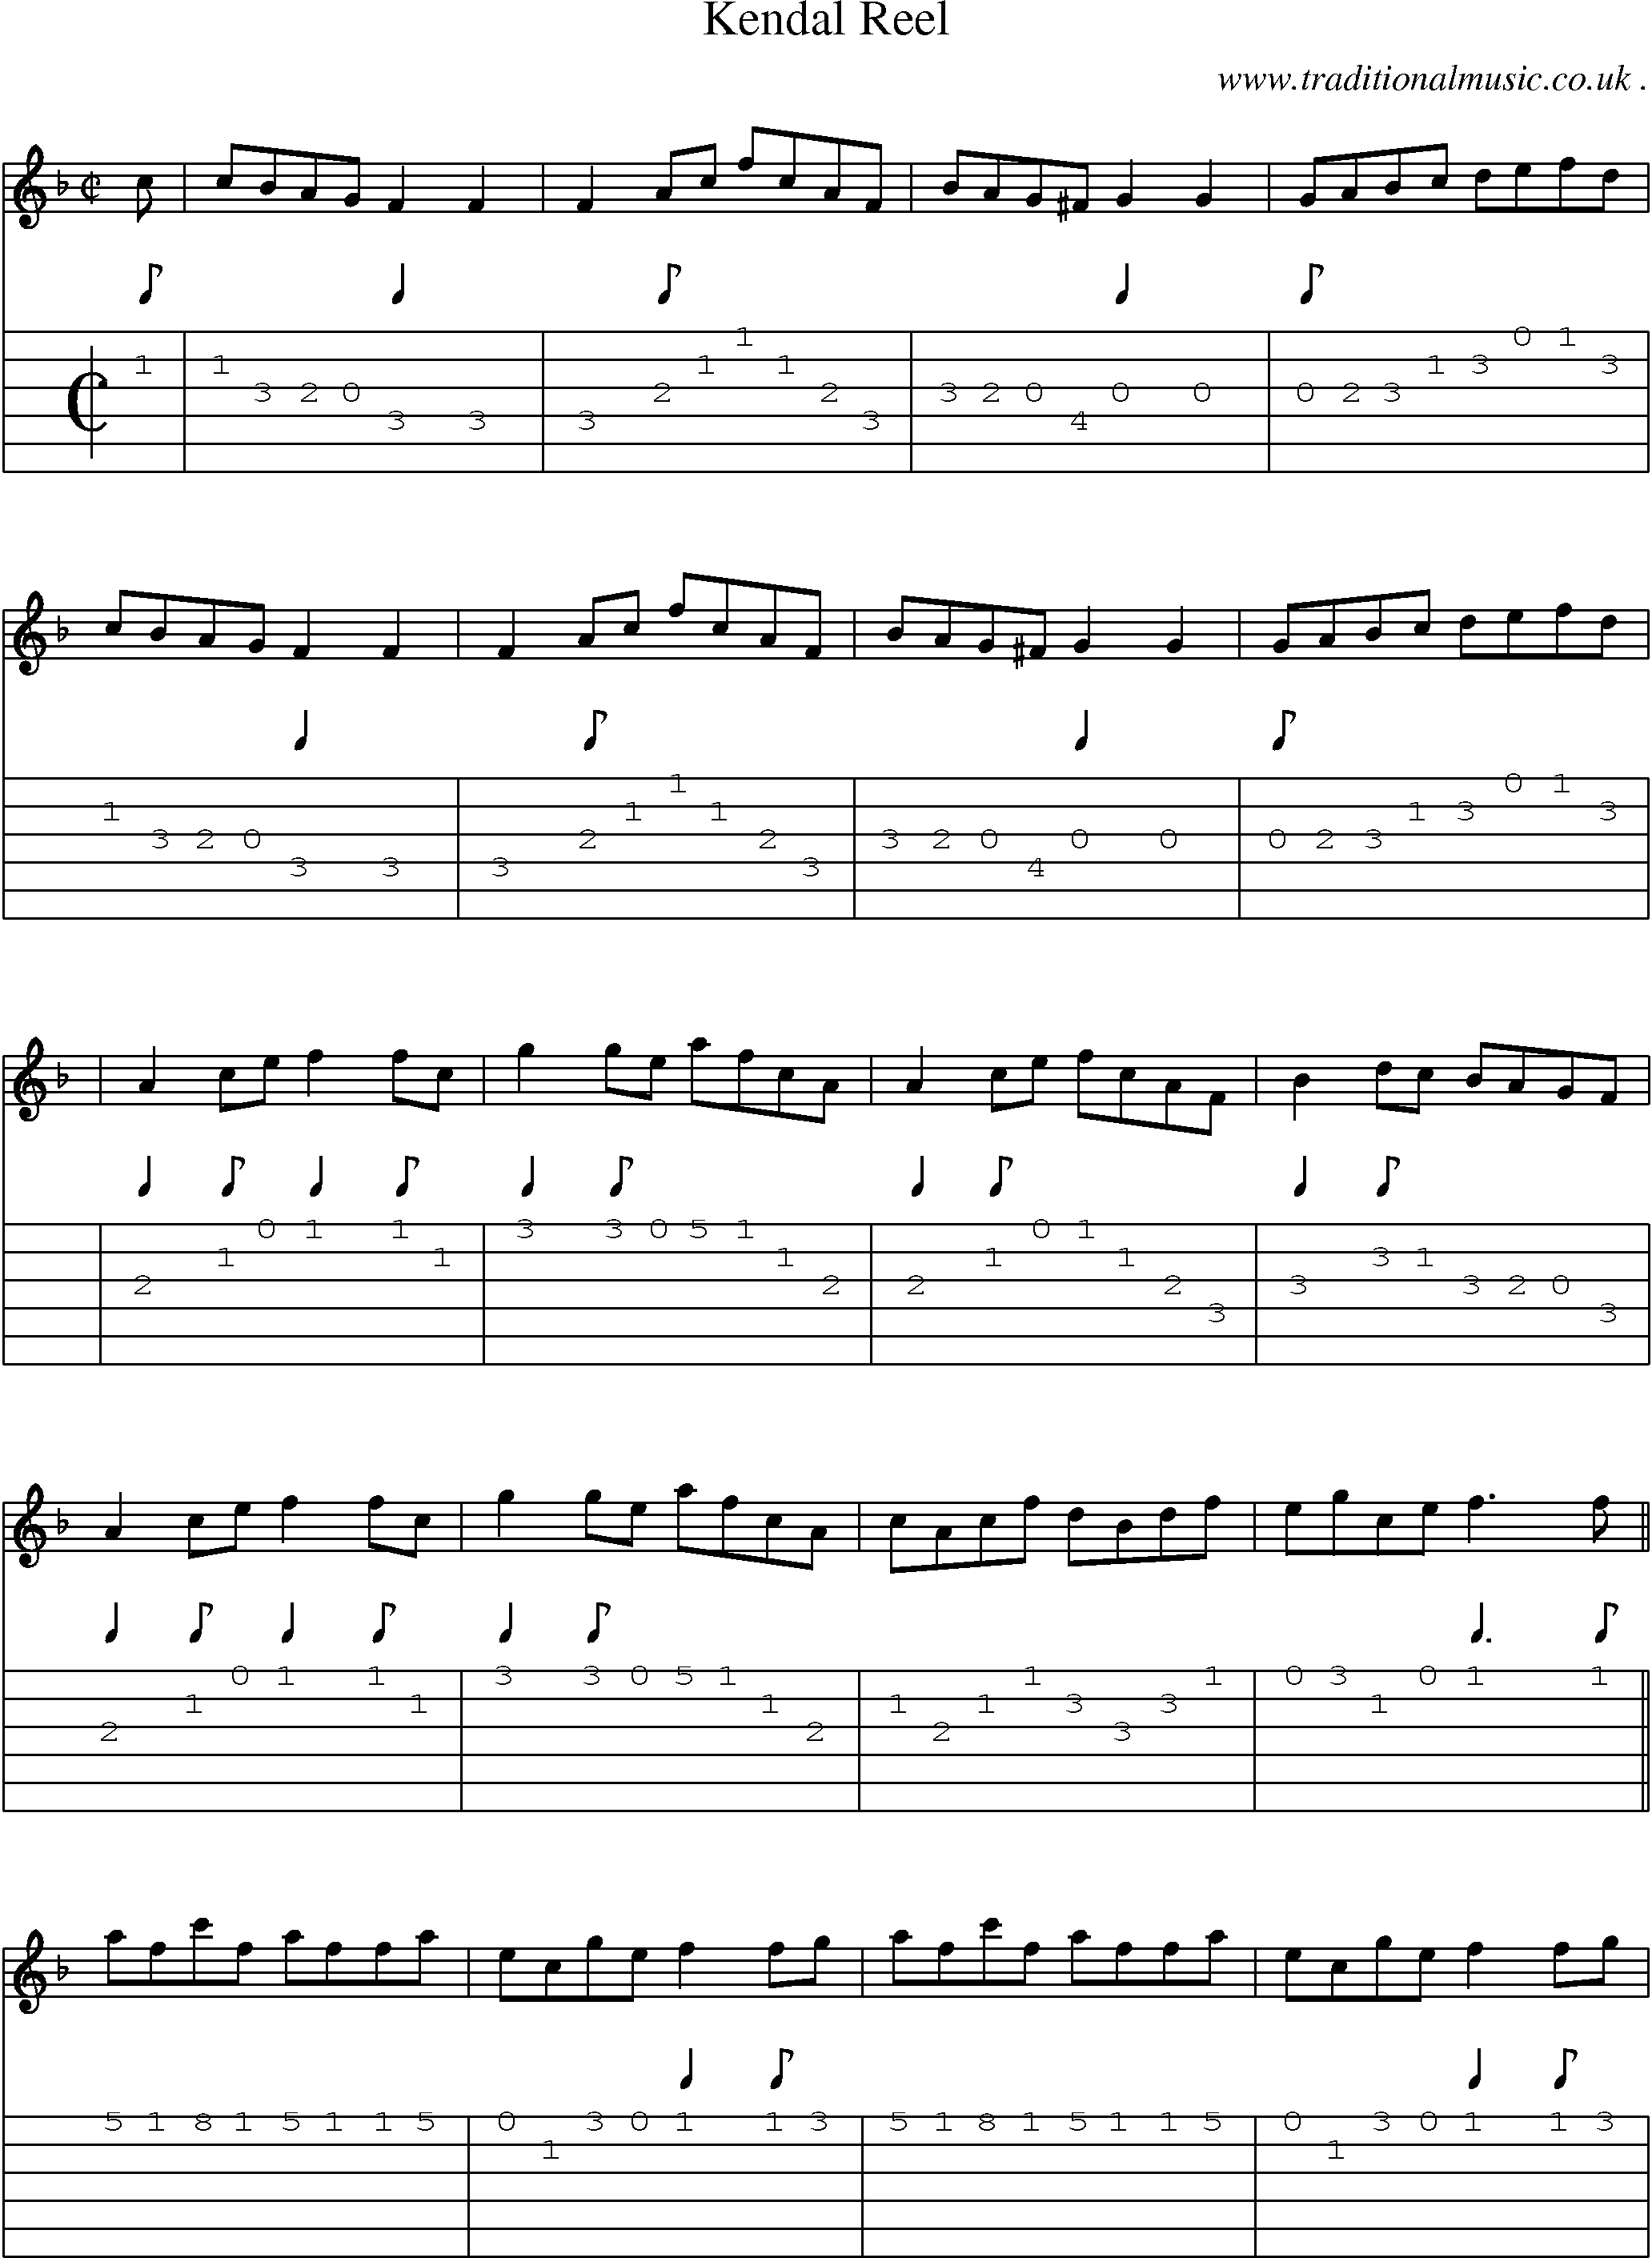 Sheet-Music and Guitar Tabs for Kendal Reel